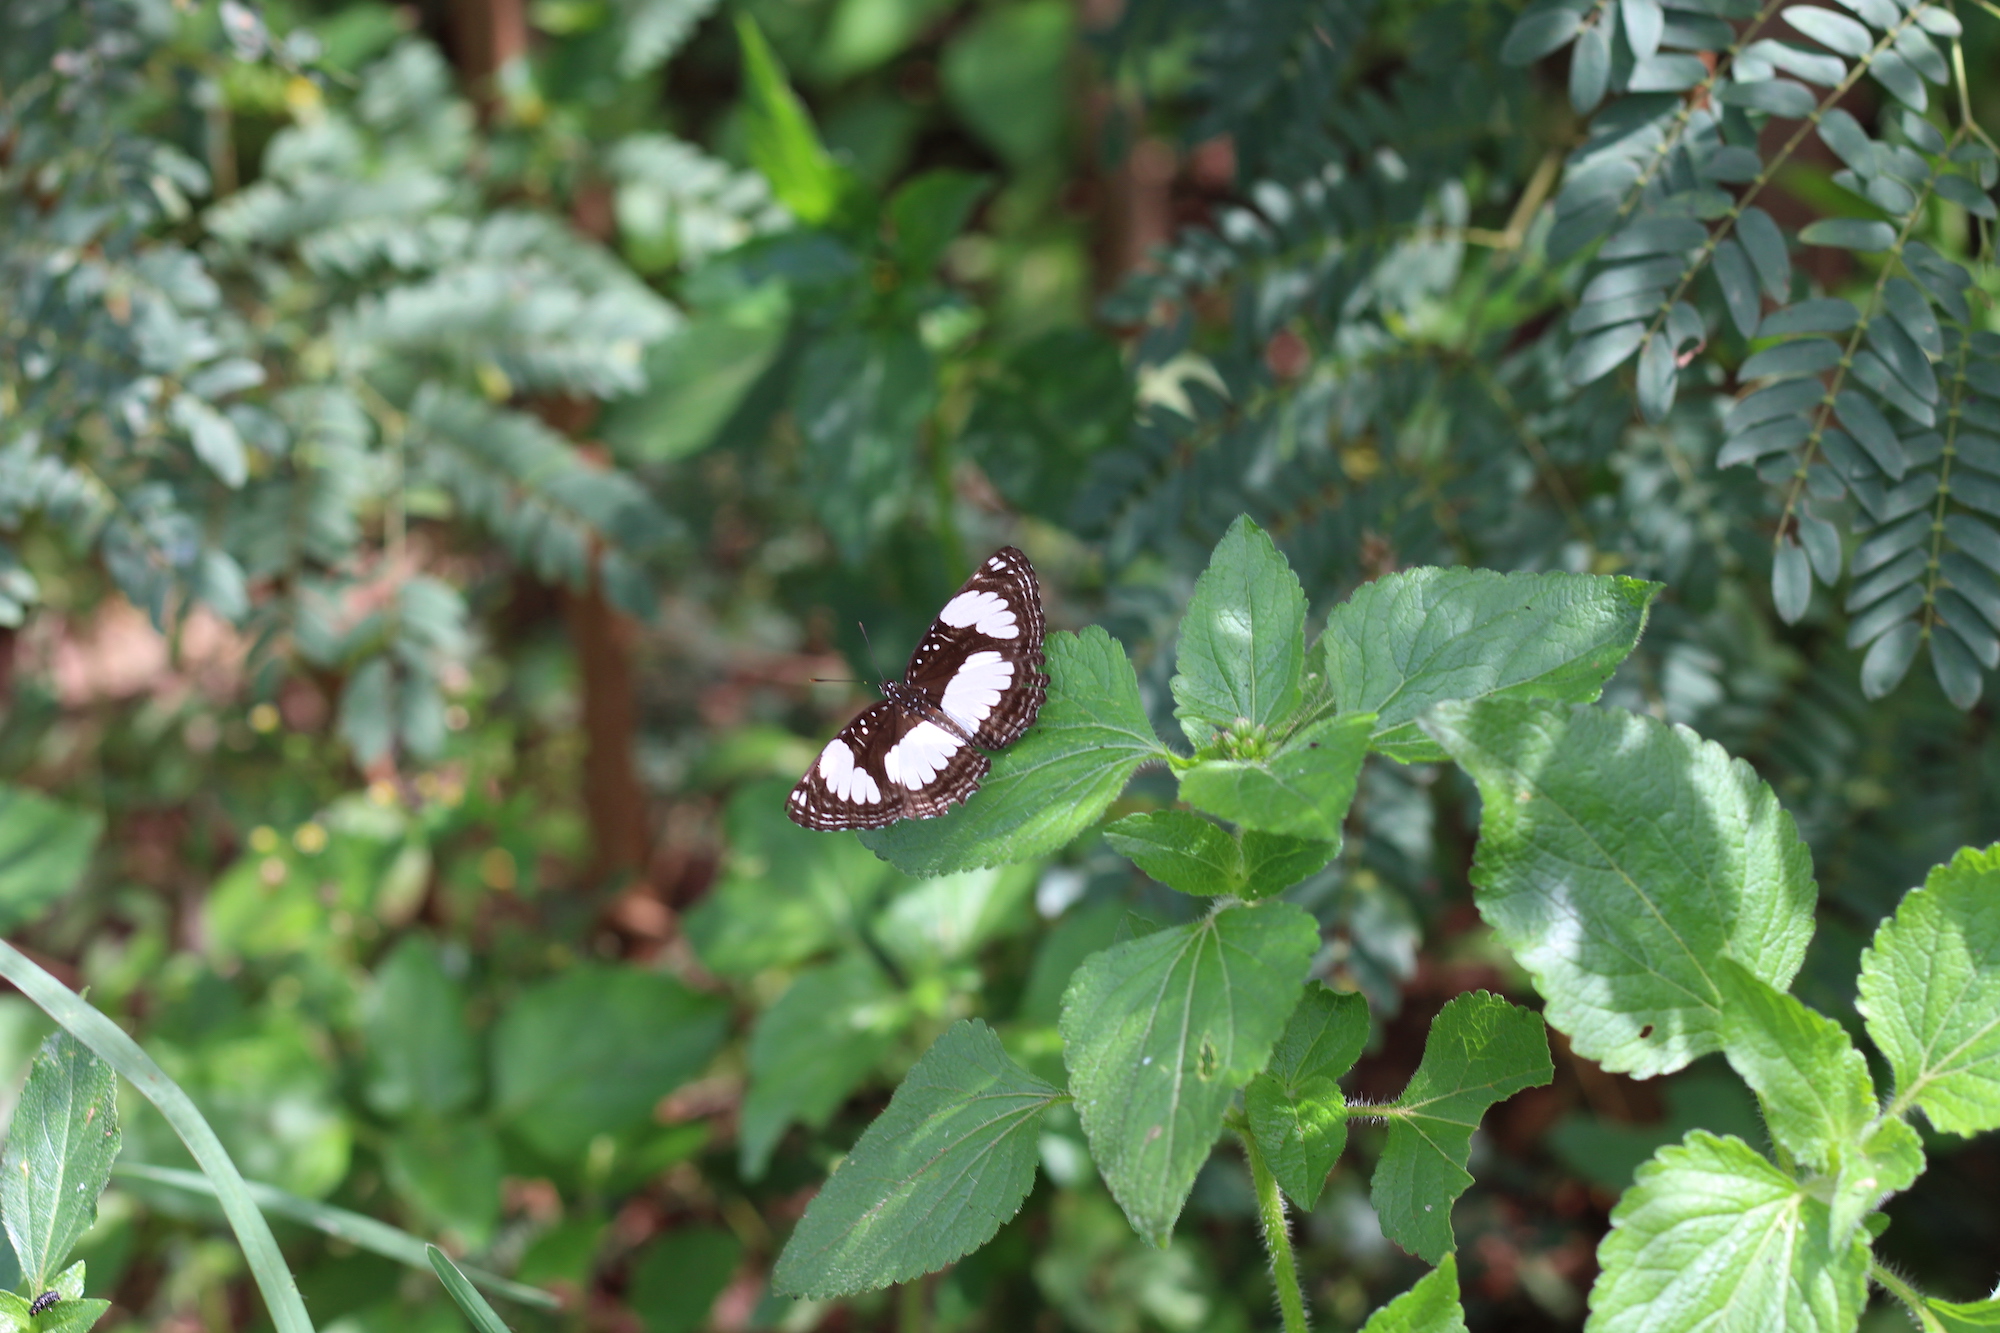 Butterfly with black and white wings perched on a green leaf in a garden.